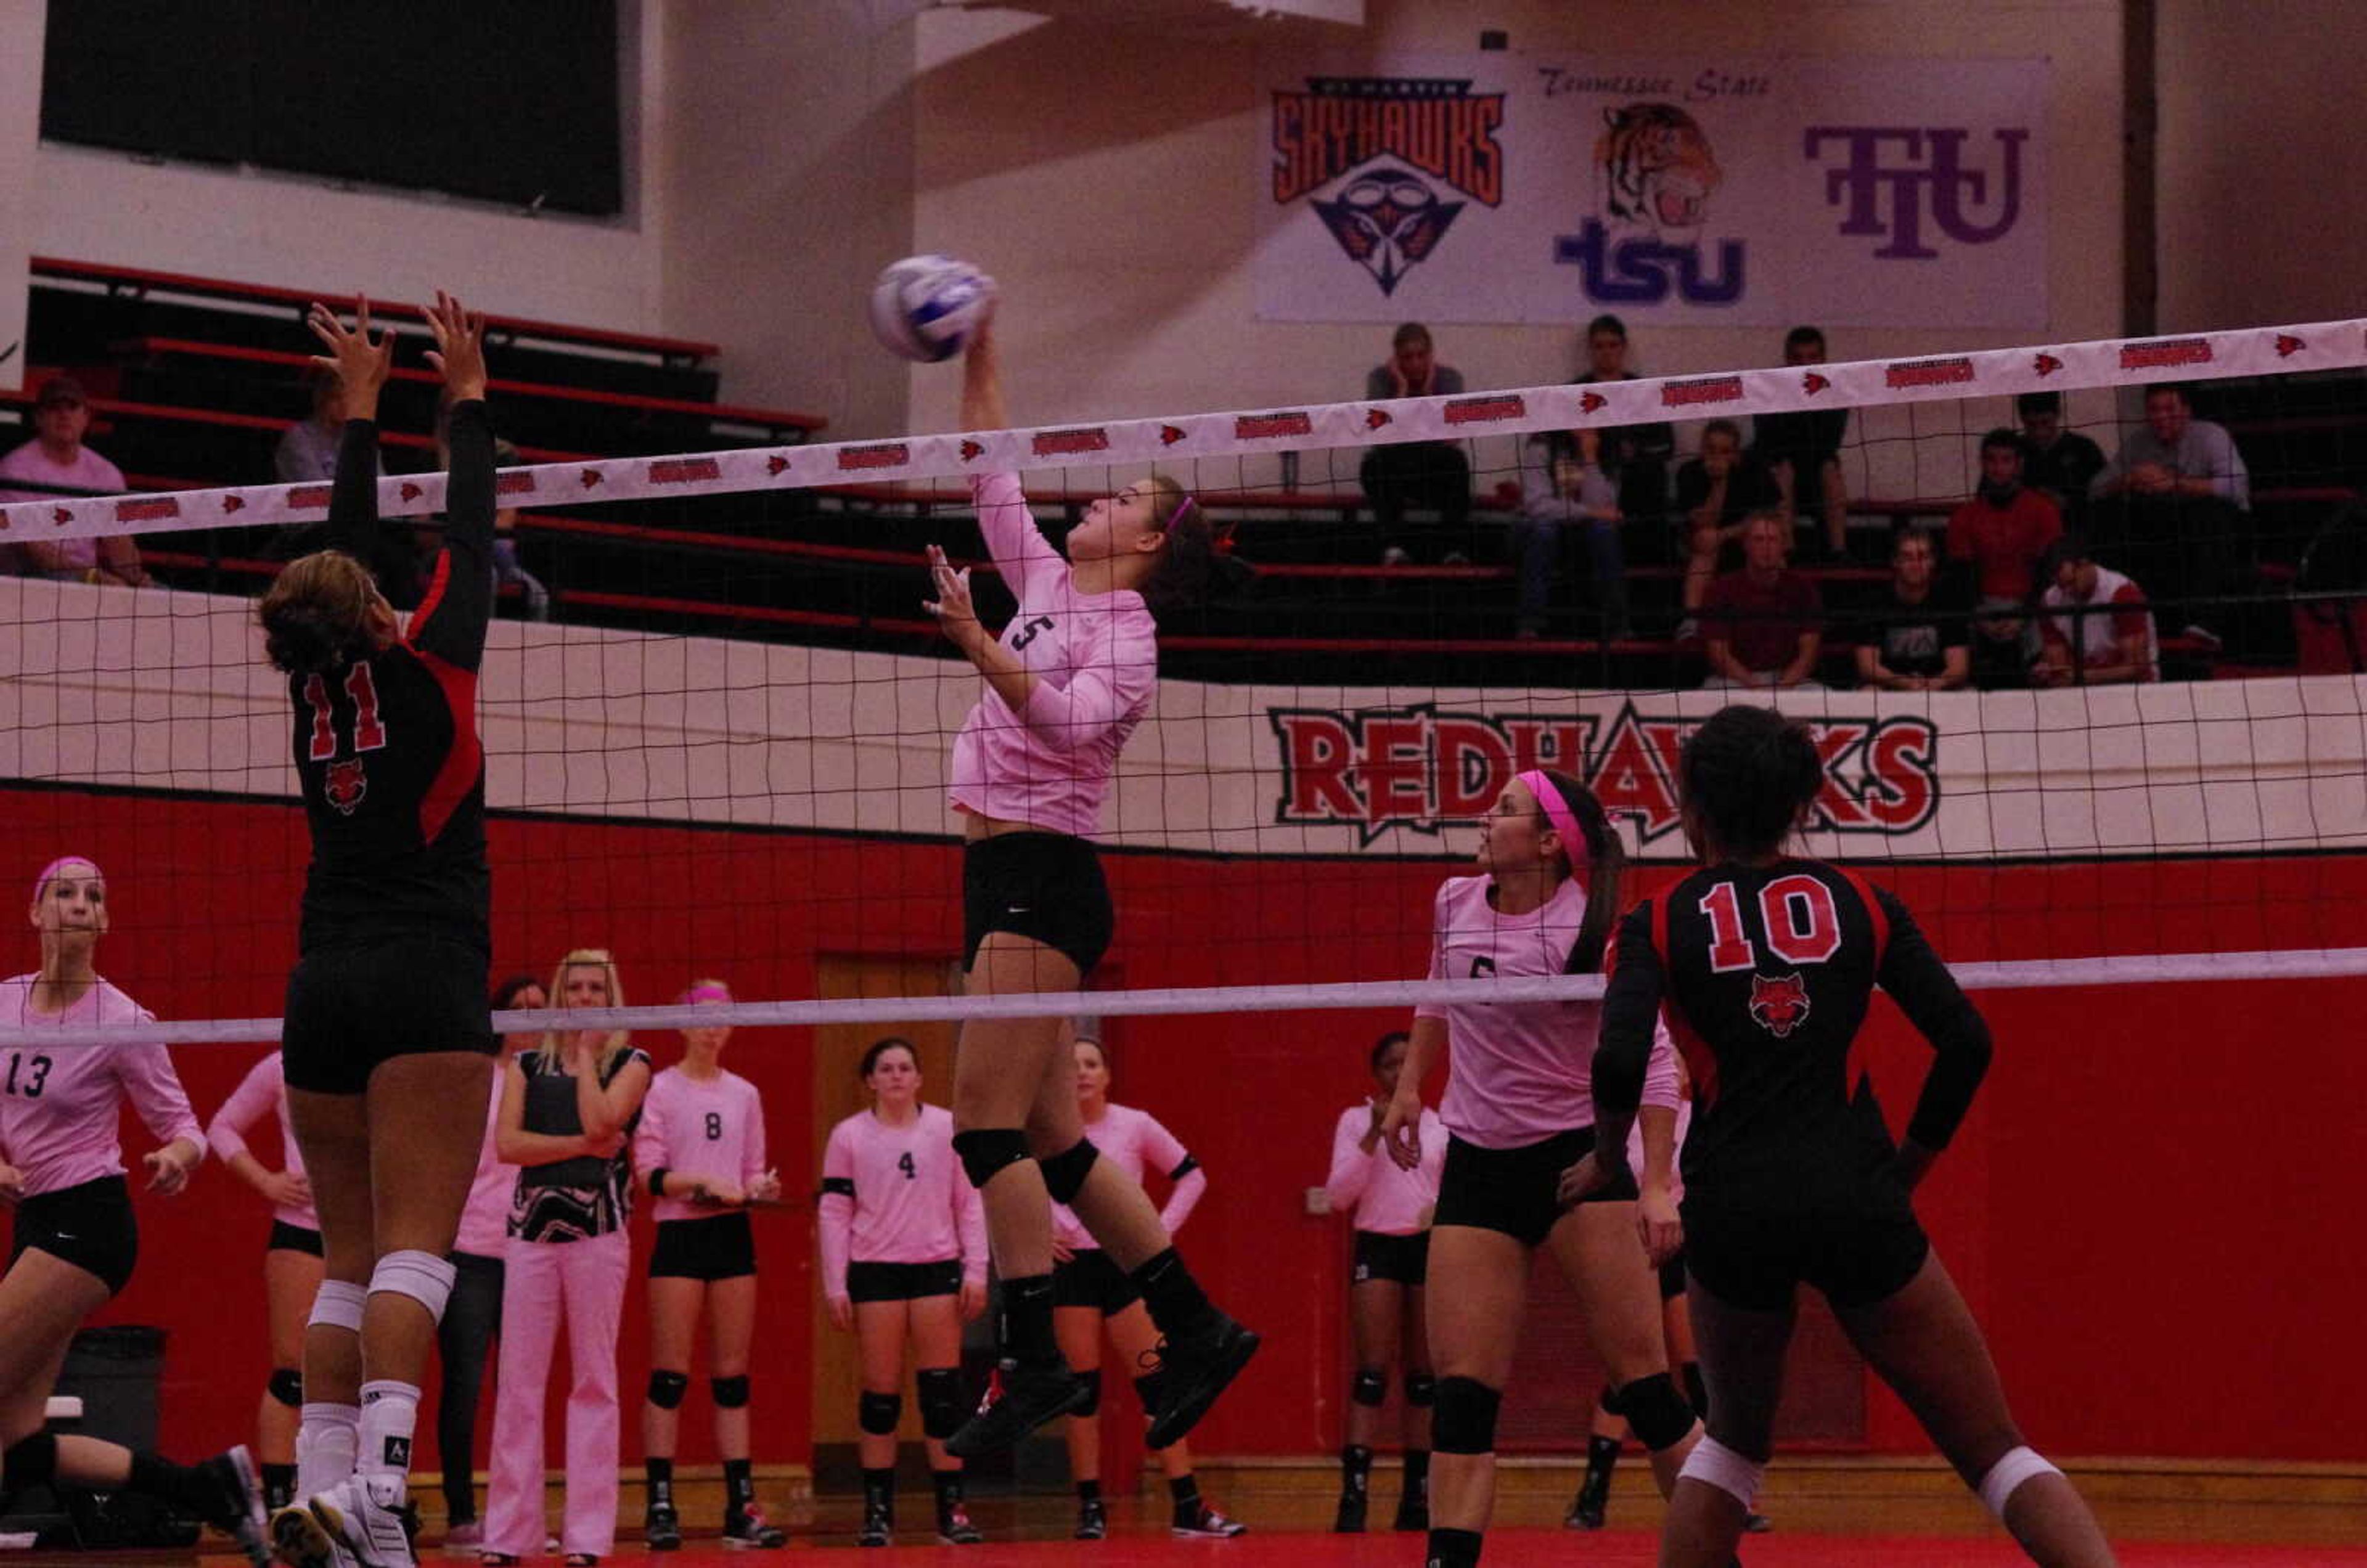 Southeast volleyball team's win streak comes to an end